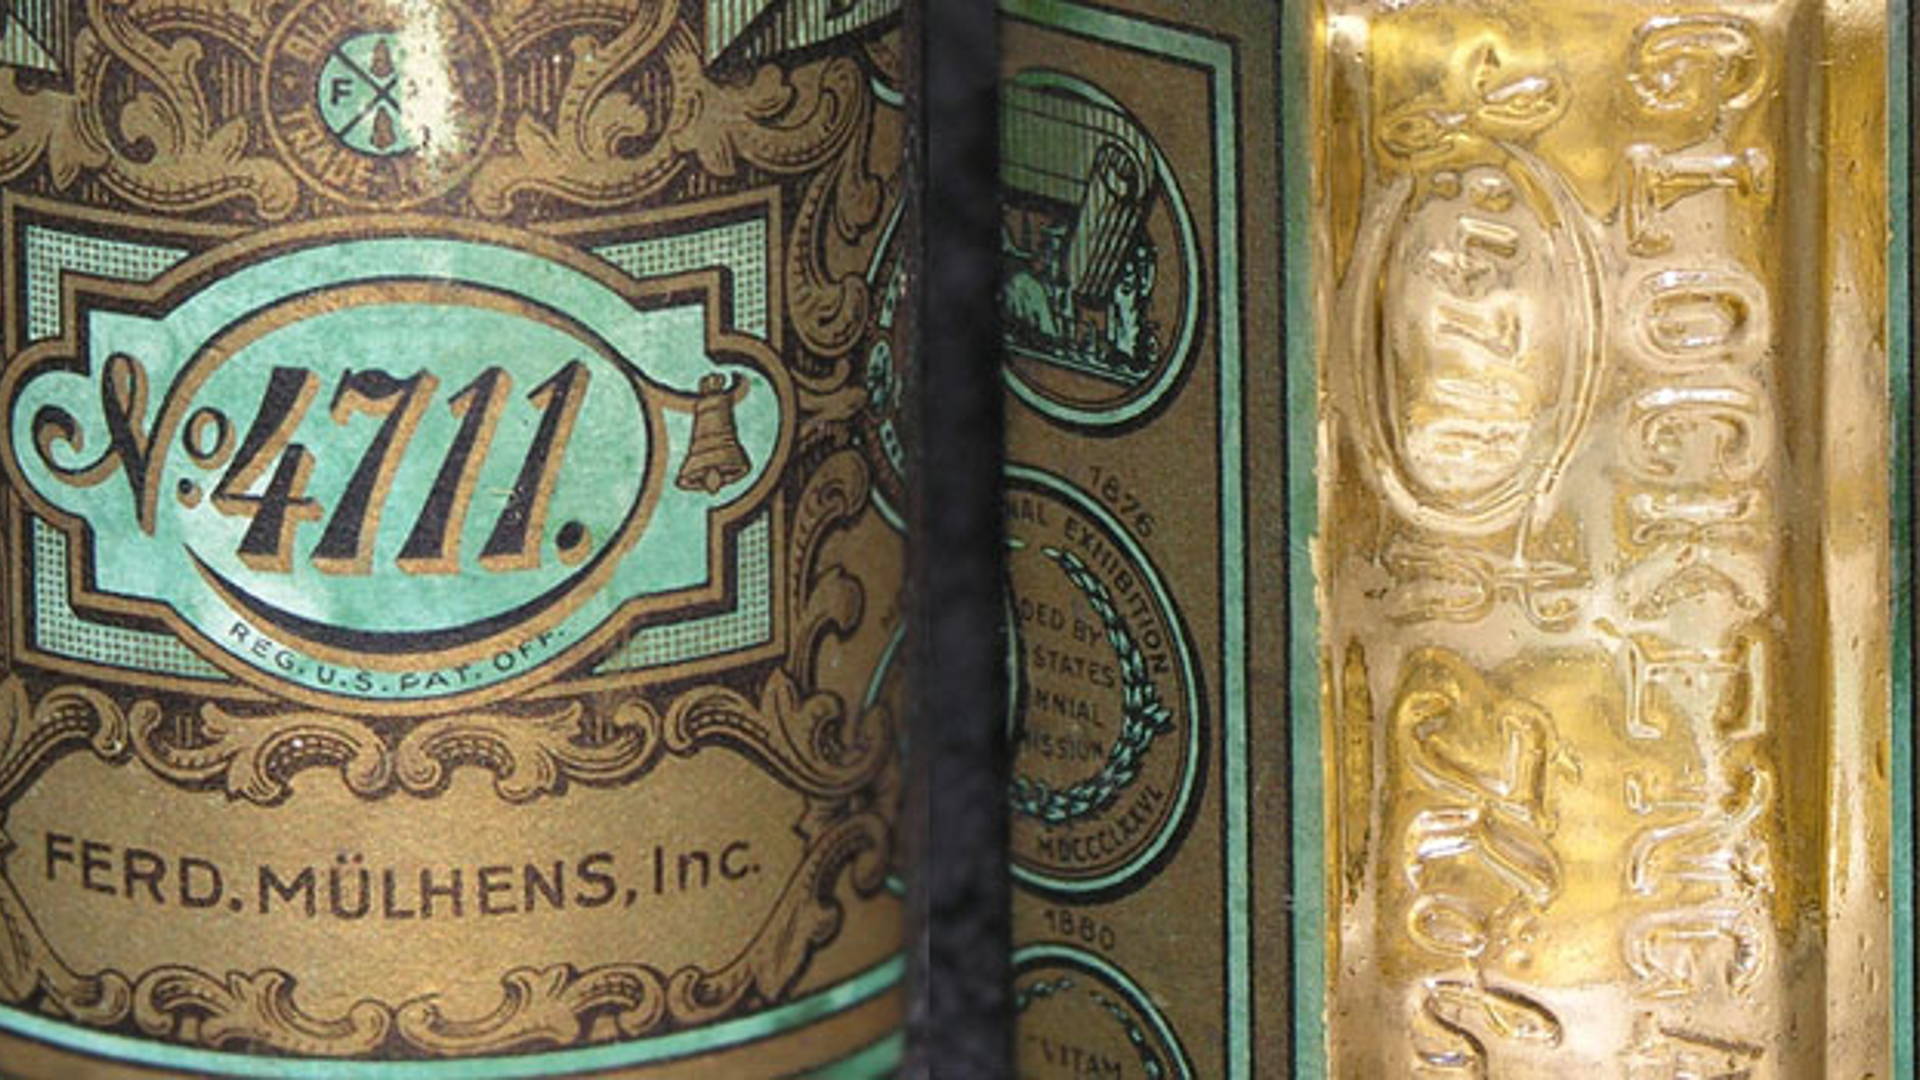 Featured image for Vintage Packaging: No.4711 Perfume